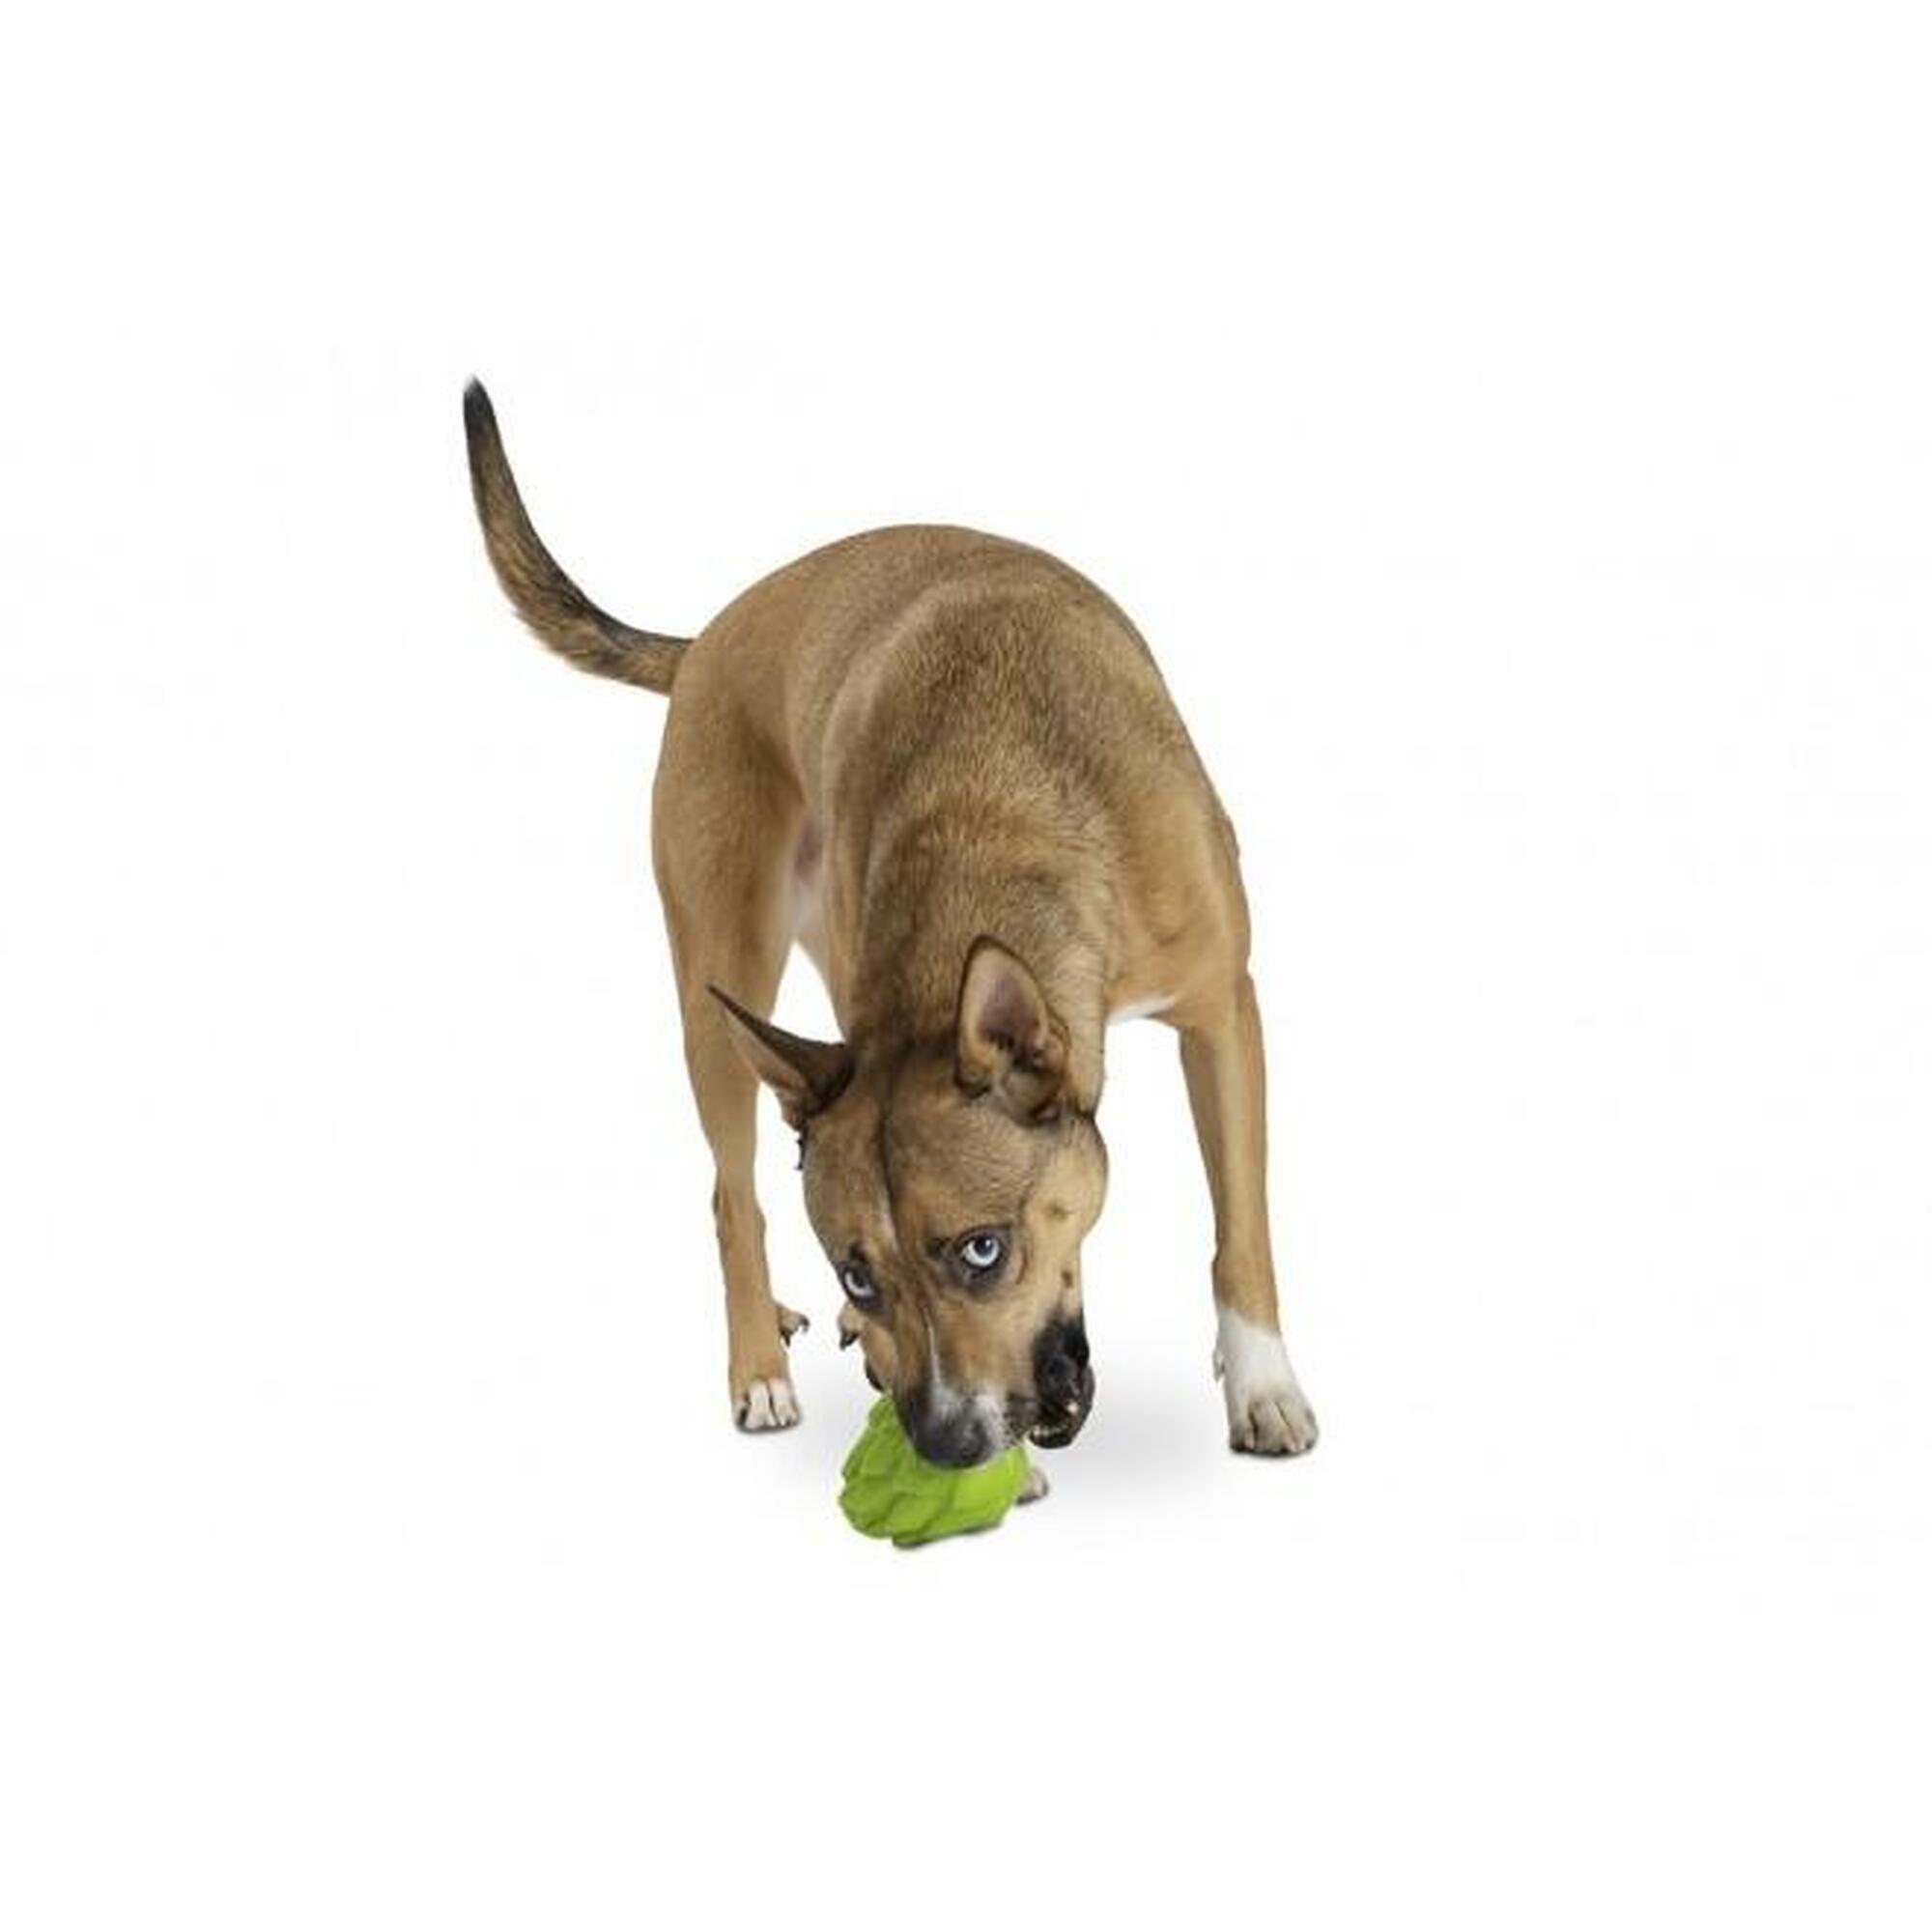 Planet Dog Orbee-Tuff Sport Golf Ball, jouet pour chien